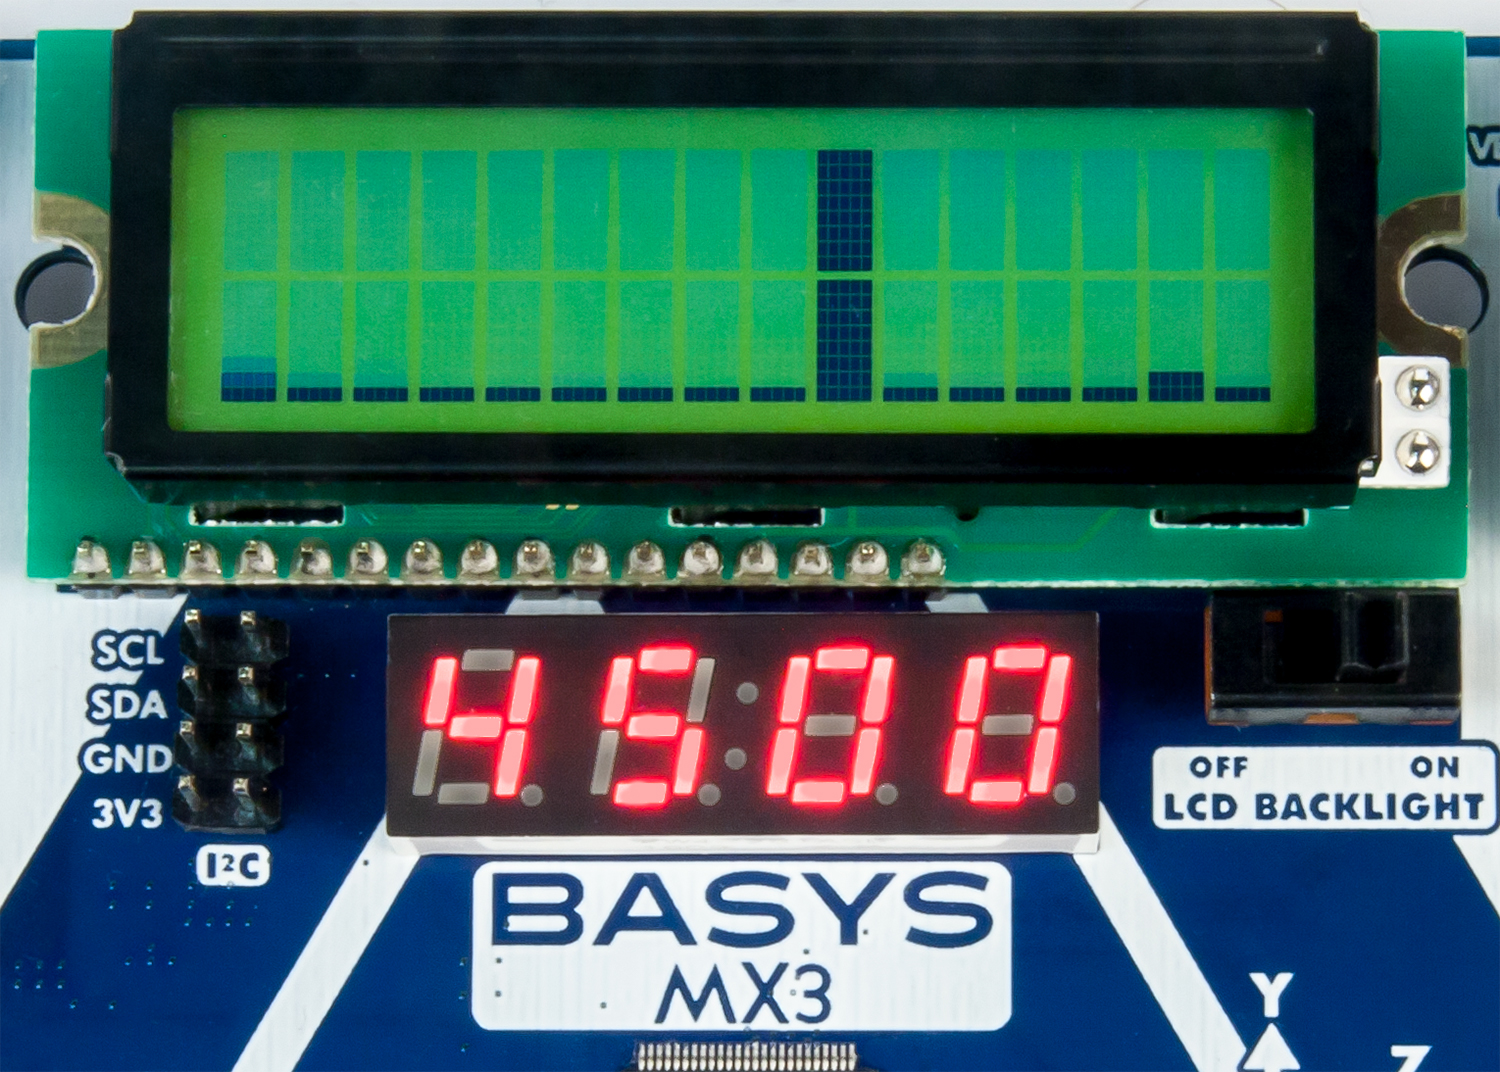 Figure 8.2. LCD and 7-segment display for spectrum analyzer.